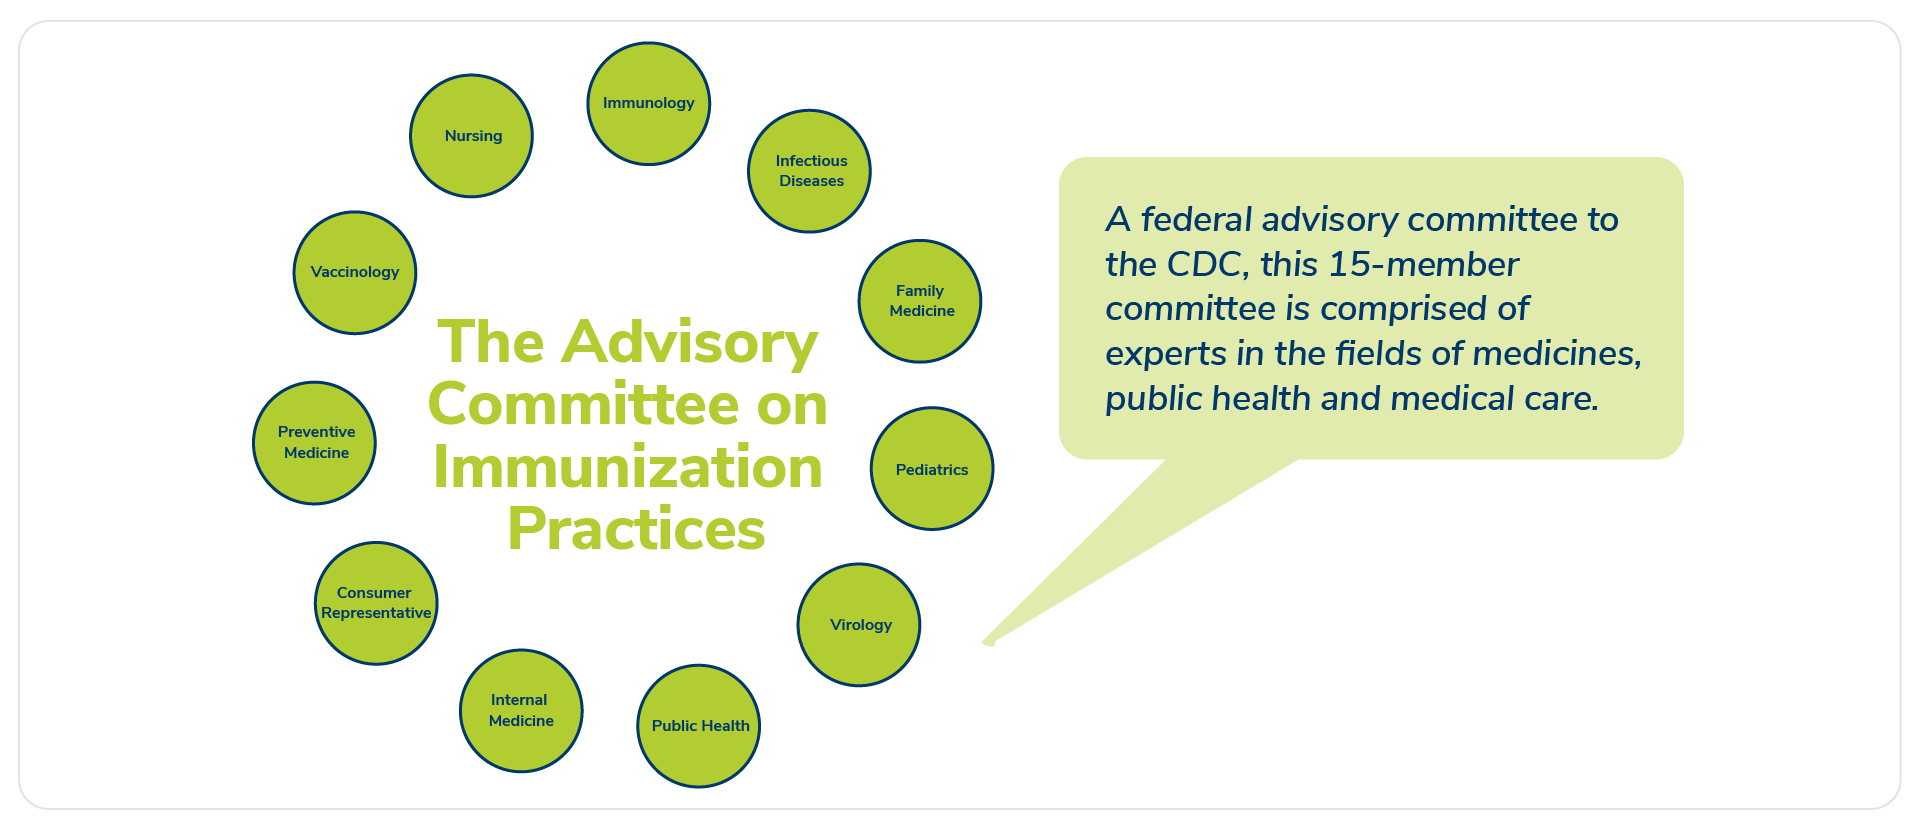 A federal Advisory Committee